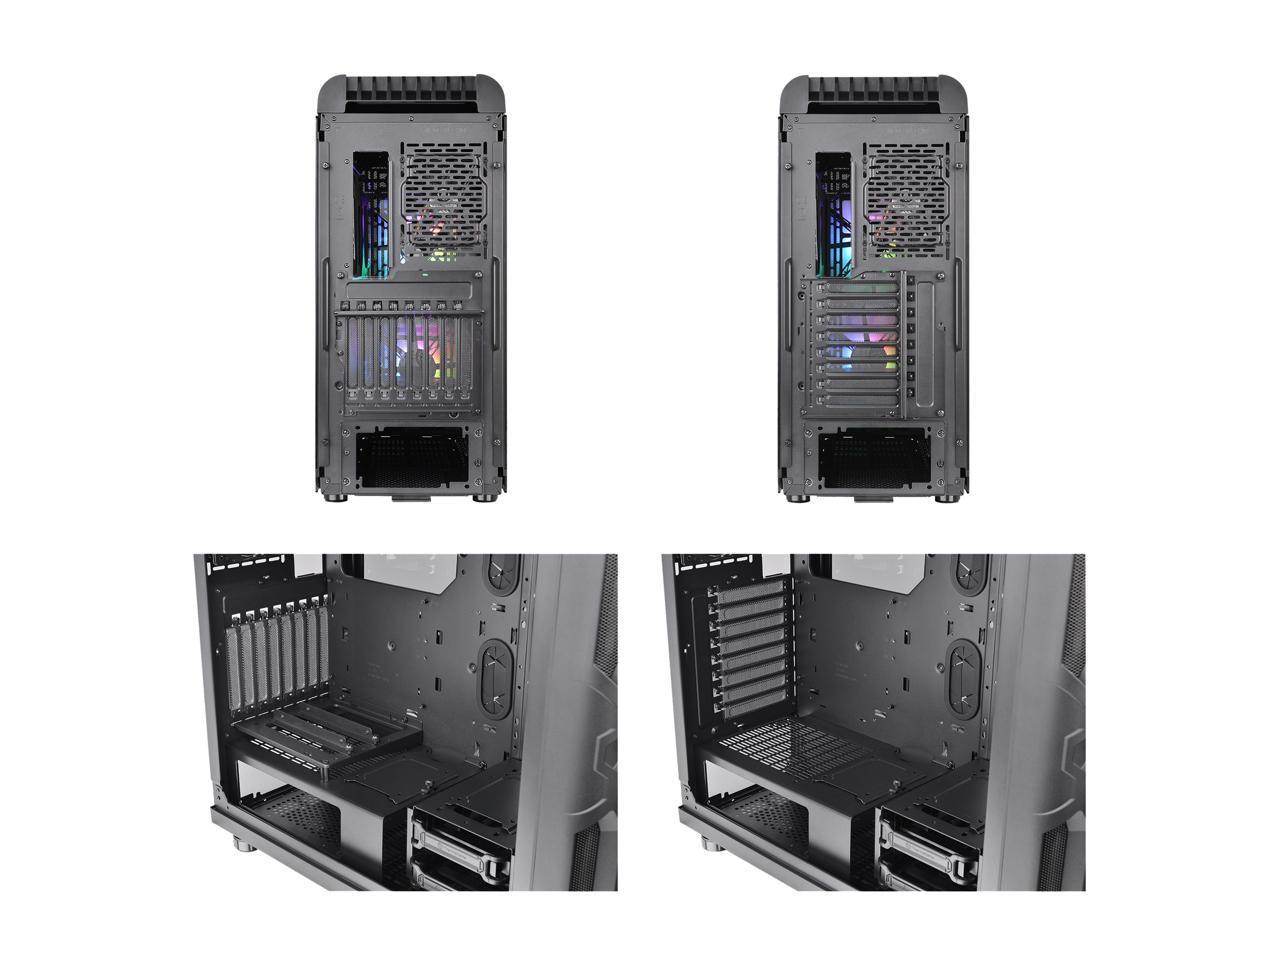 Thermaltake Level 20 Rs Motherboard Sync Argb Atx Mid Tower Gaming Computer Case